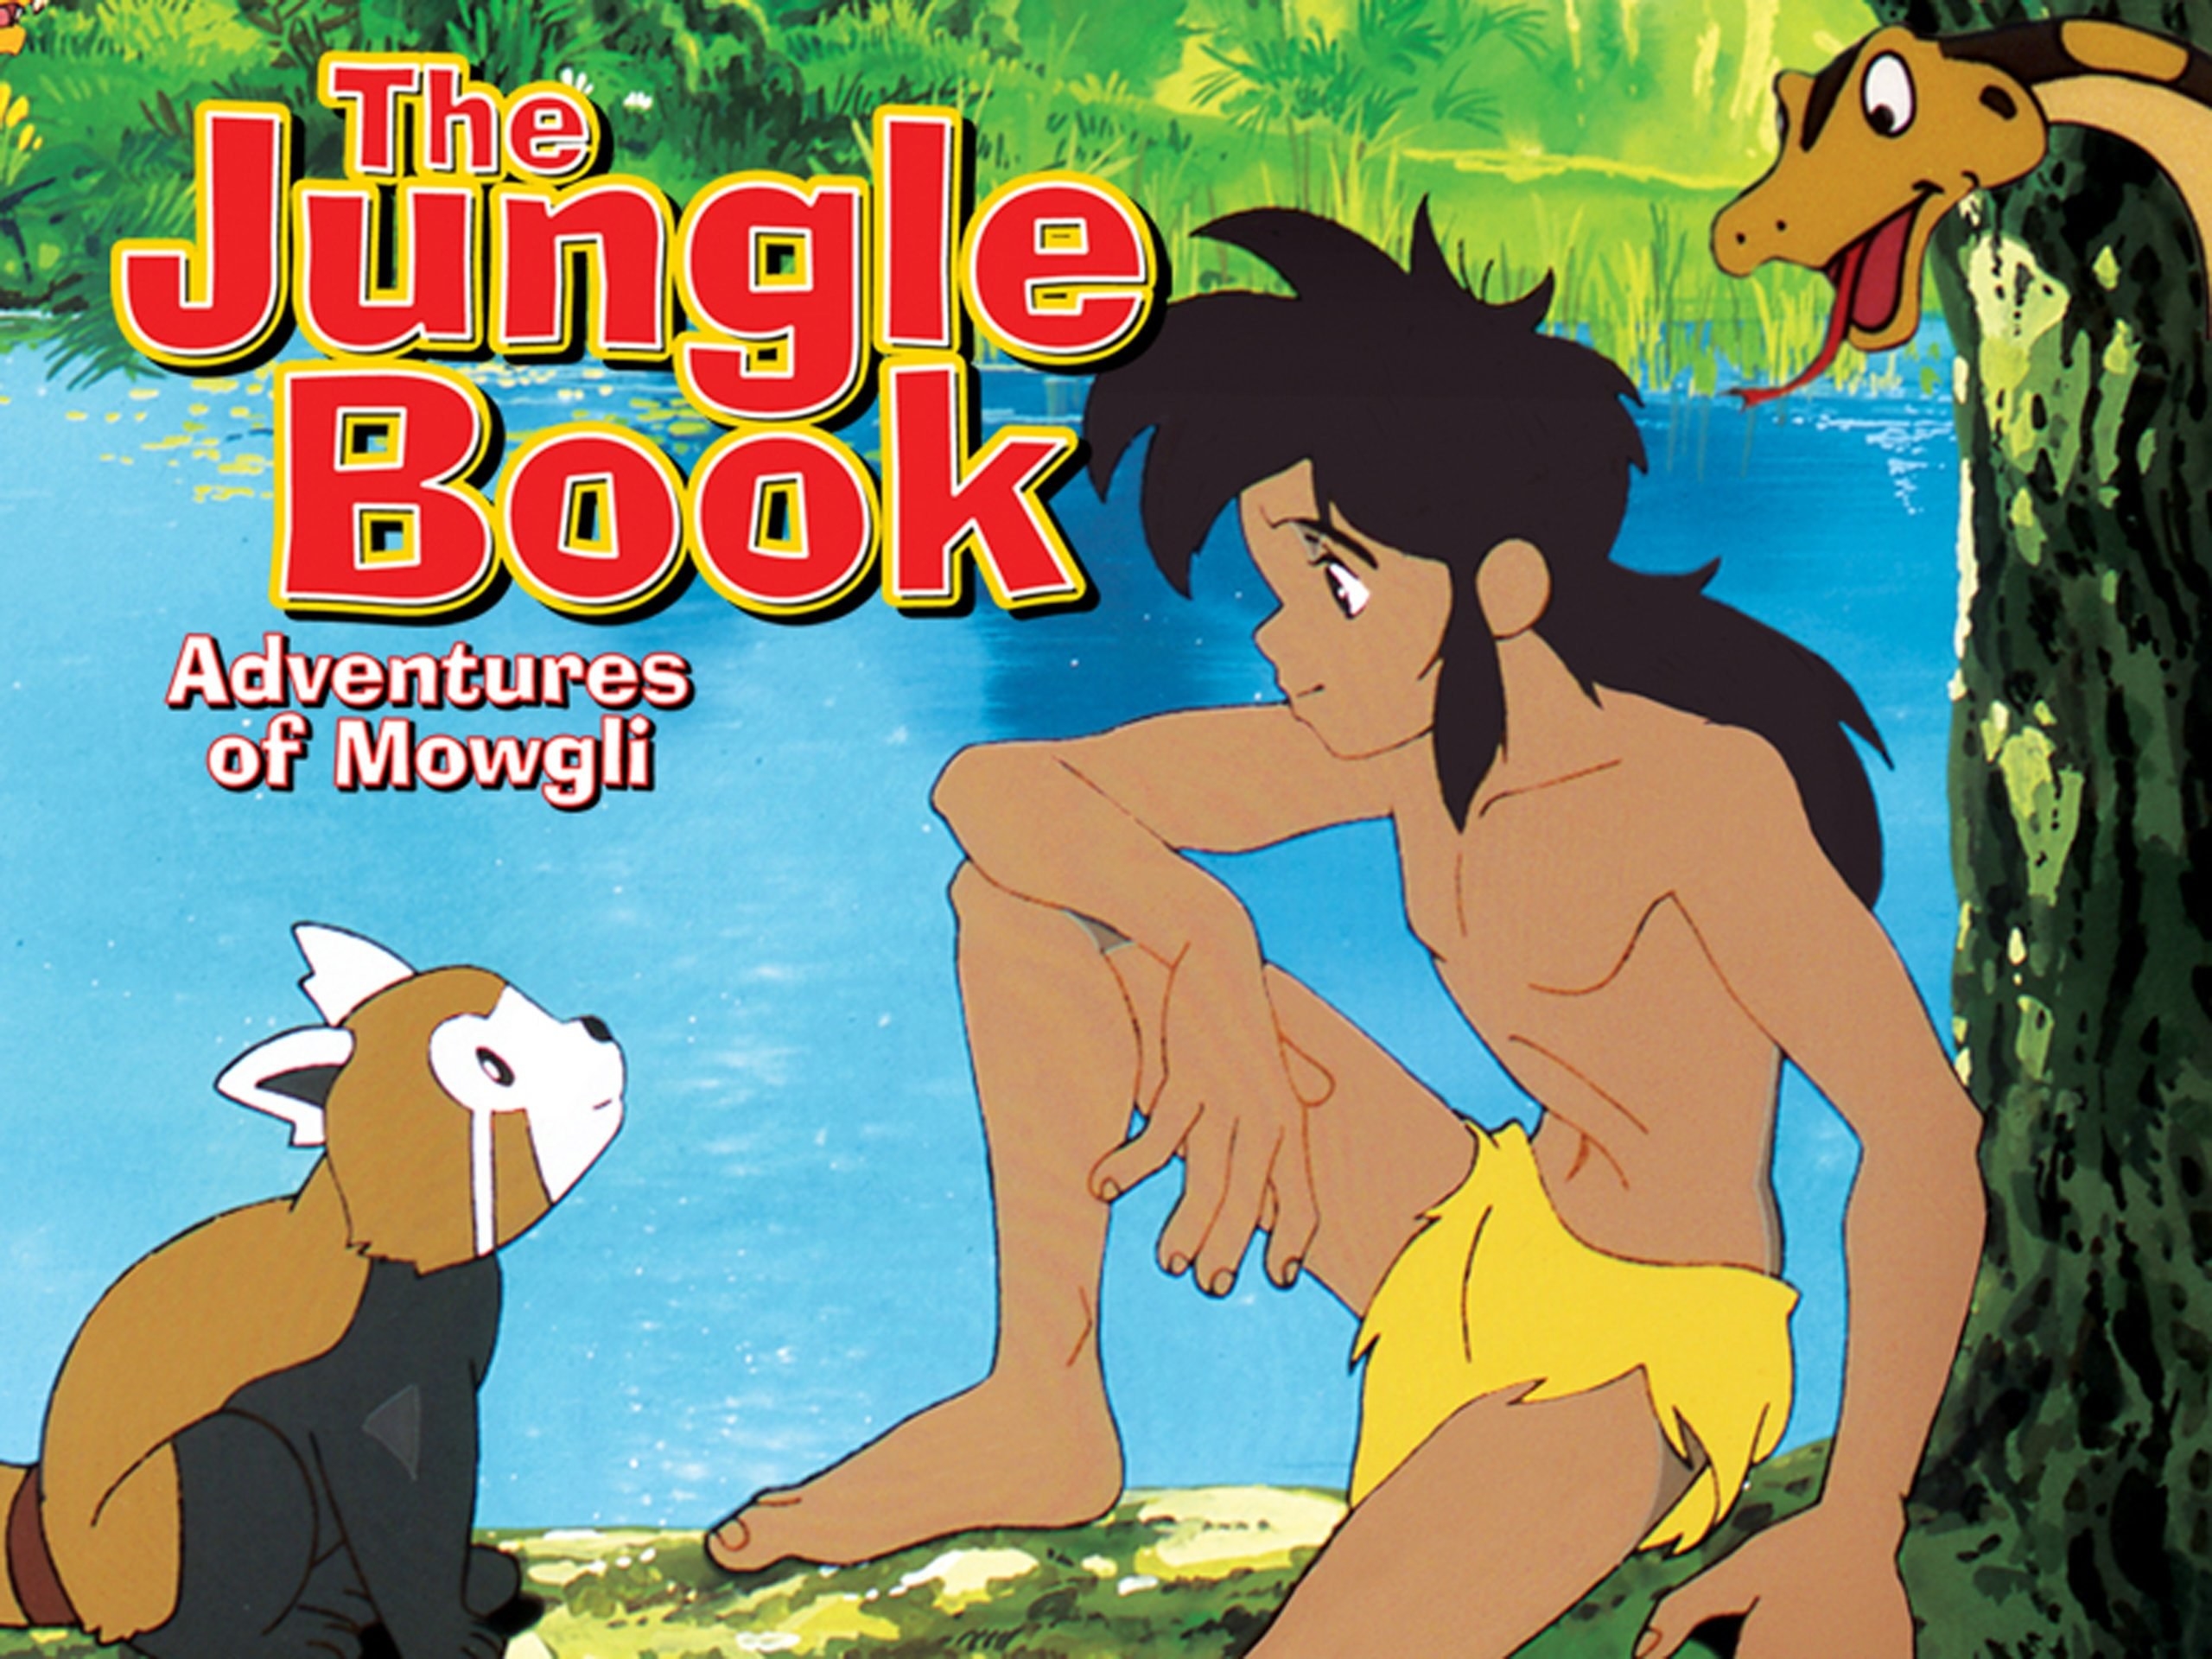 A poster of the Indian adaption of the Jungle Book